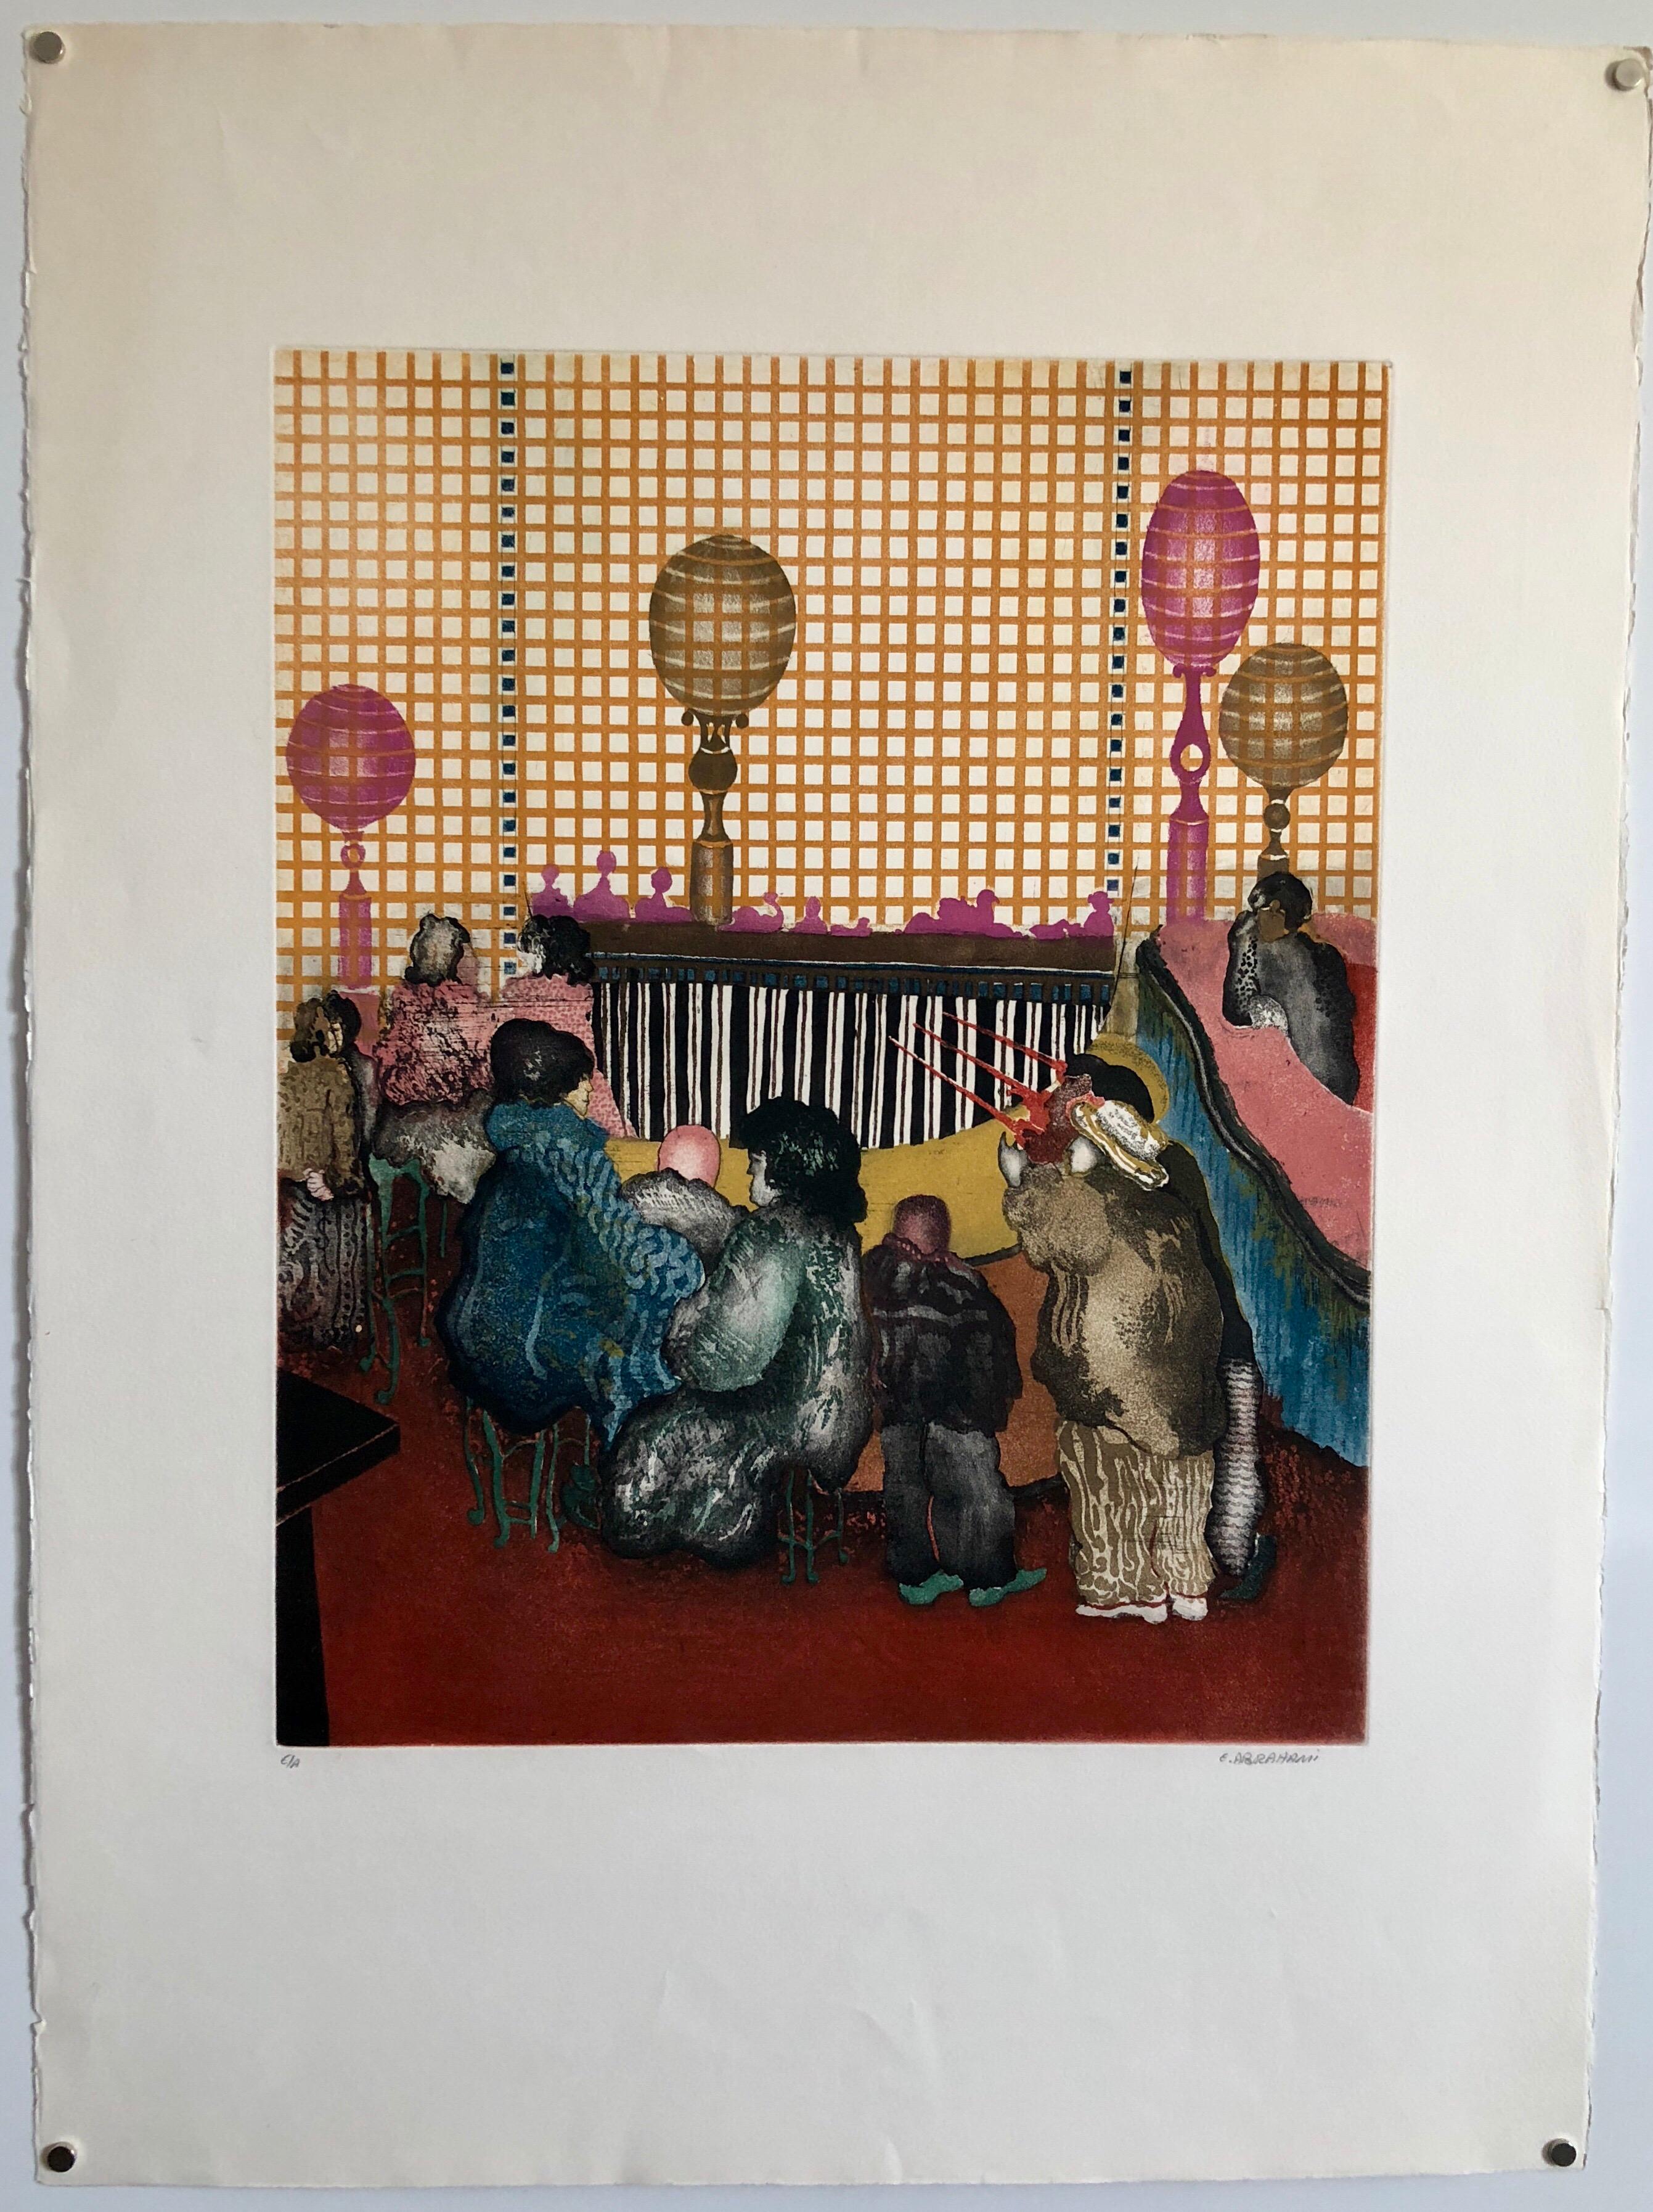 Iranian Israeli Large Aquatint Etching Figurative Abstract Circus Monde Balloons For Sale 3